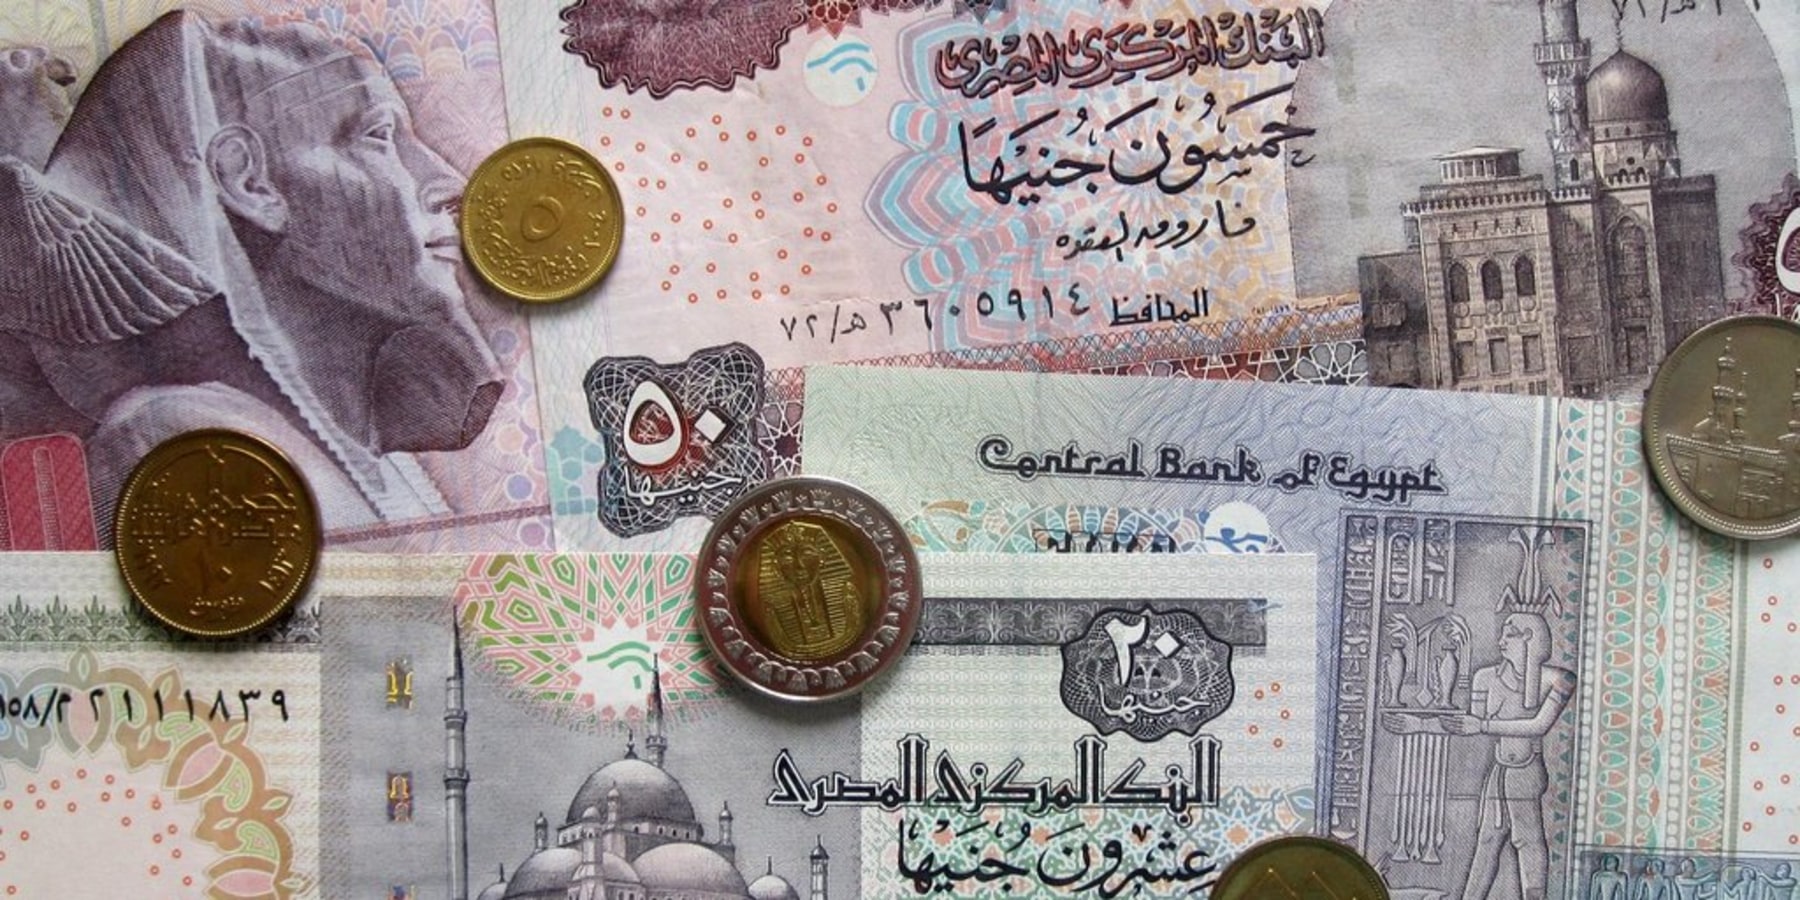 Currency, inflation woes in focus as Egypt's Sisi set for third term | Reuters